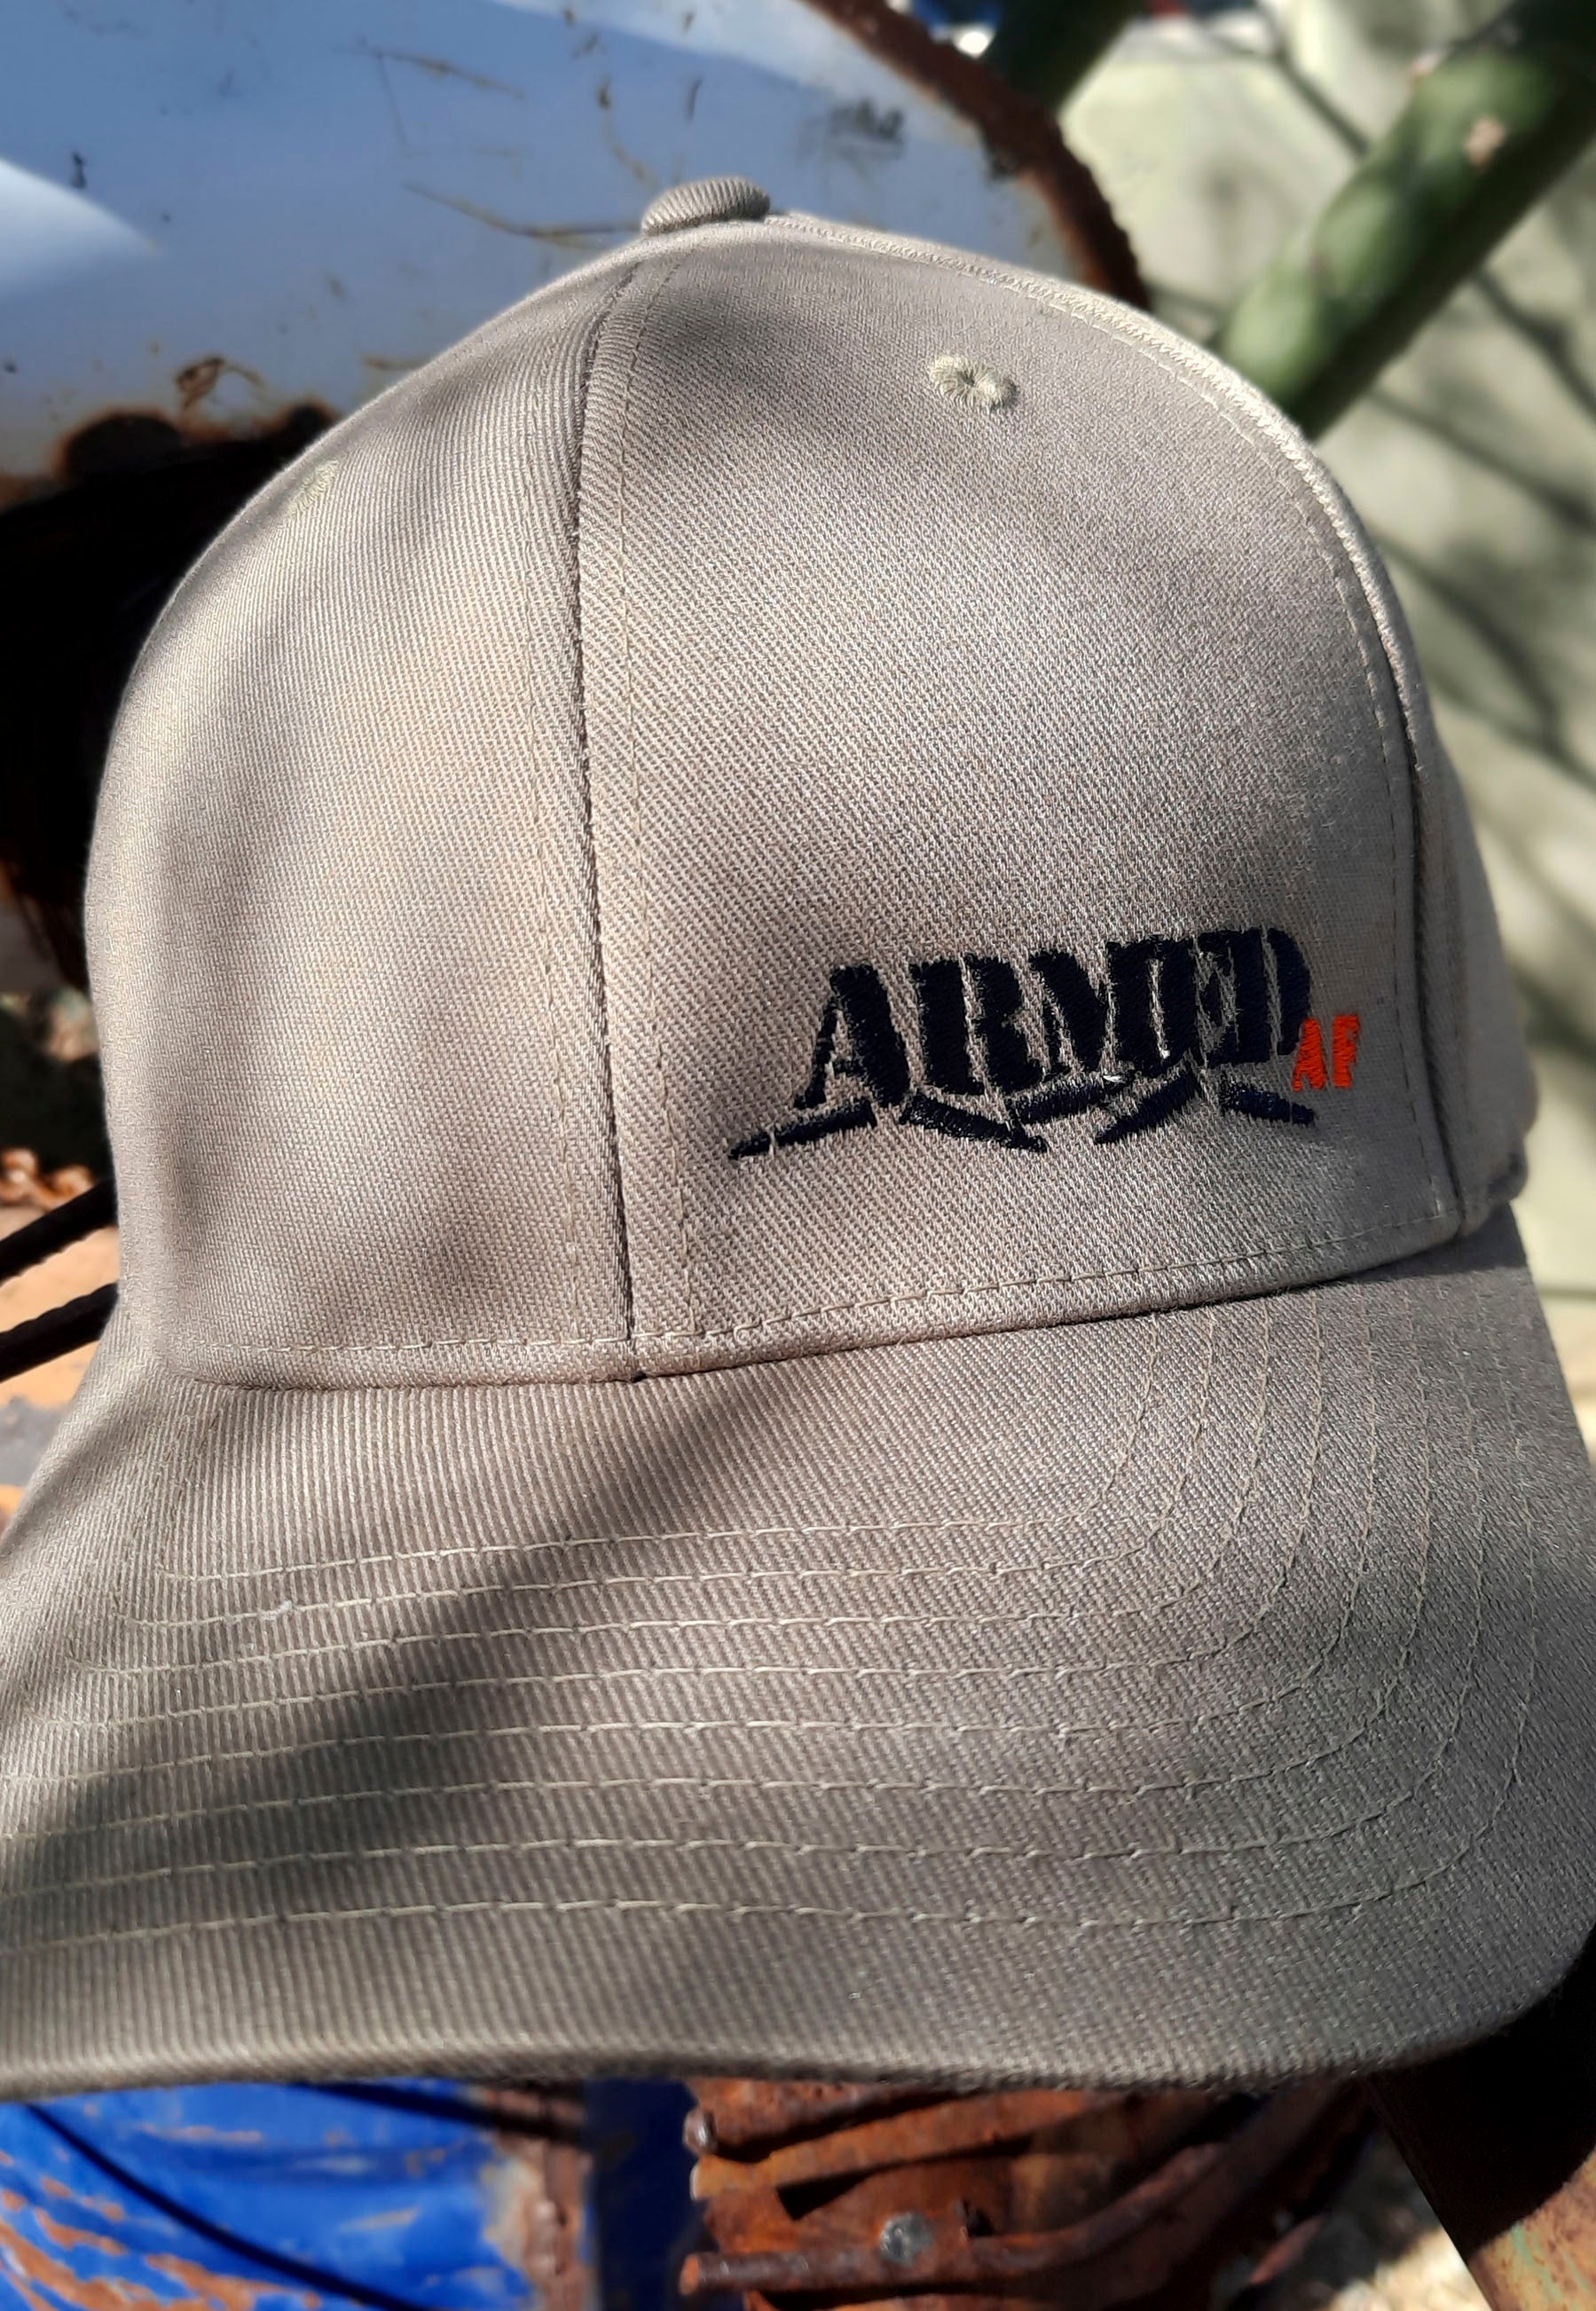 ArmedAF® embroidered hat in coyote brown